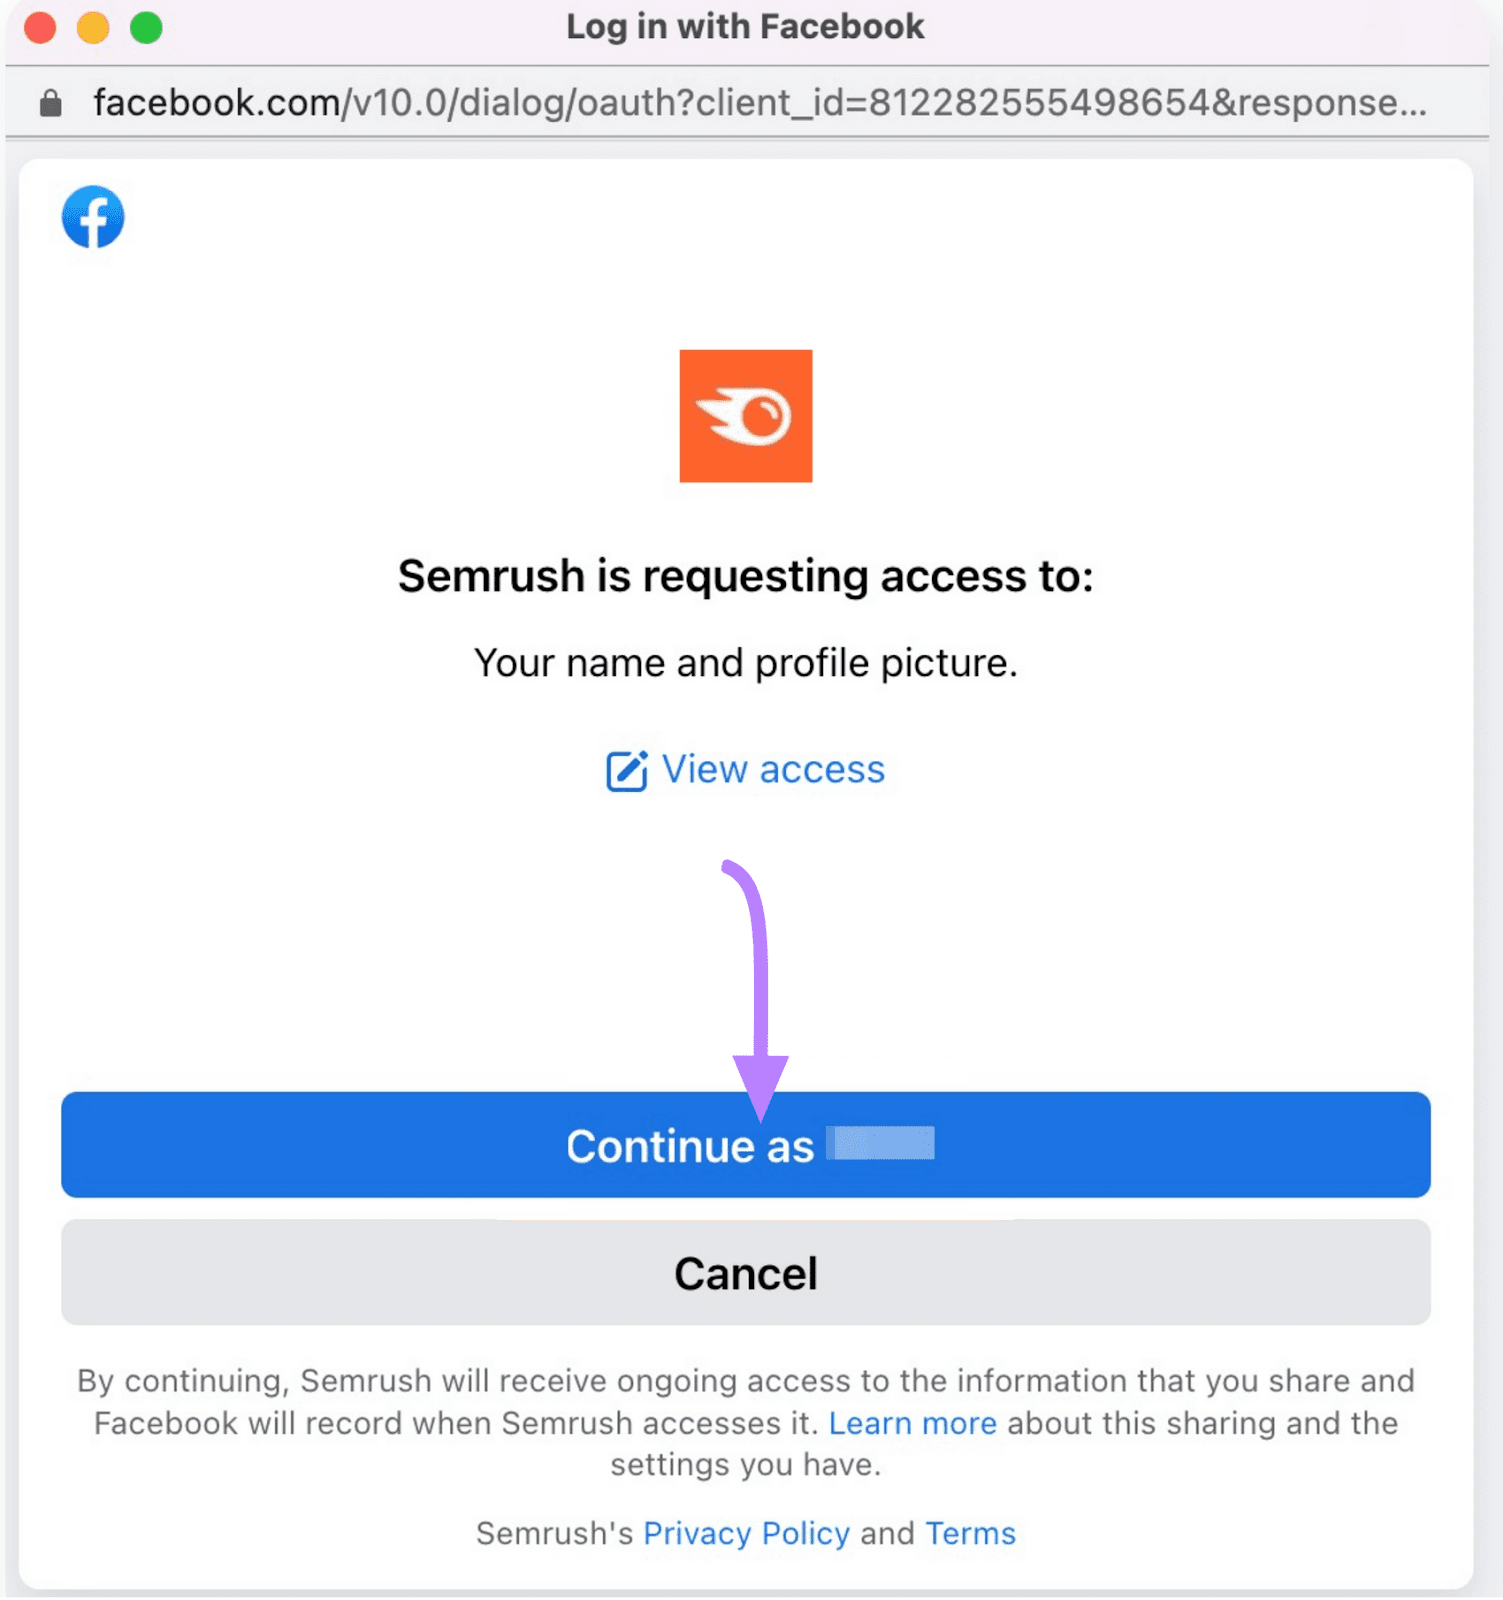 Authorize Semrush to access your Facebook account